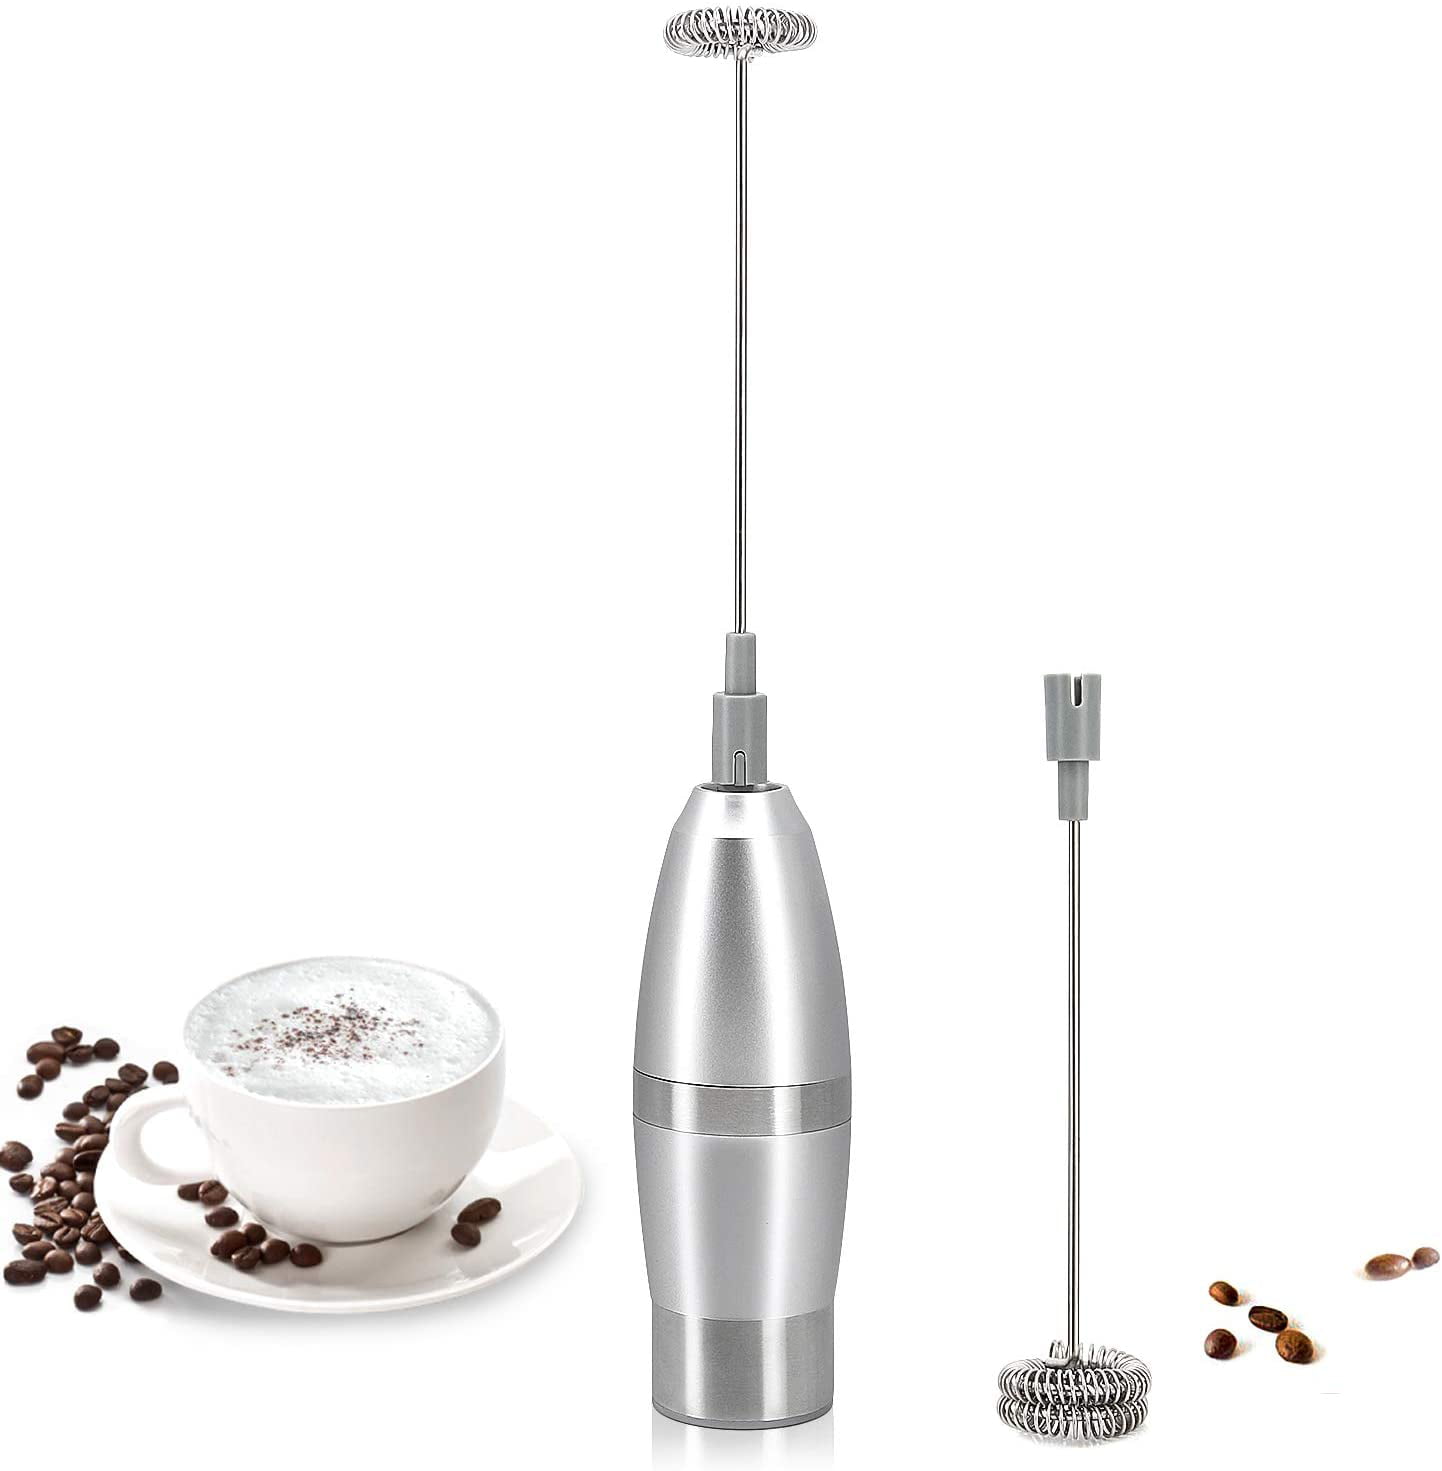 Mata1-USA Milk Frother for Coffee, Handheld Drink Mixer Electric Whisk,  Mini Stirrer Wand Foam Maker, Silver & Black